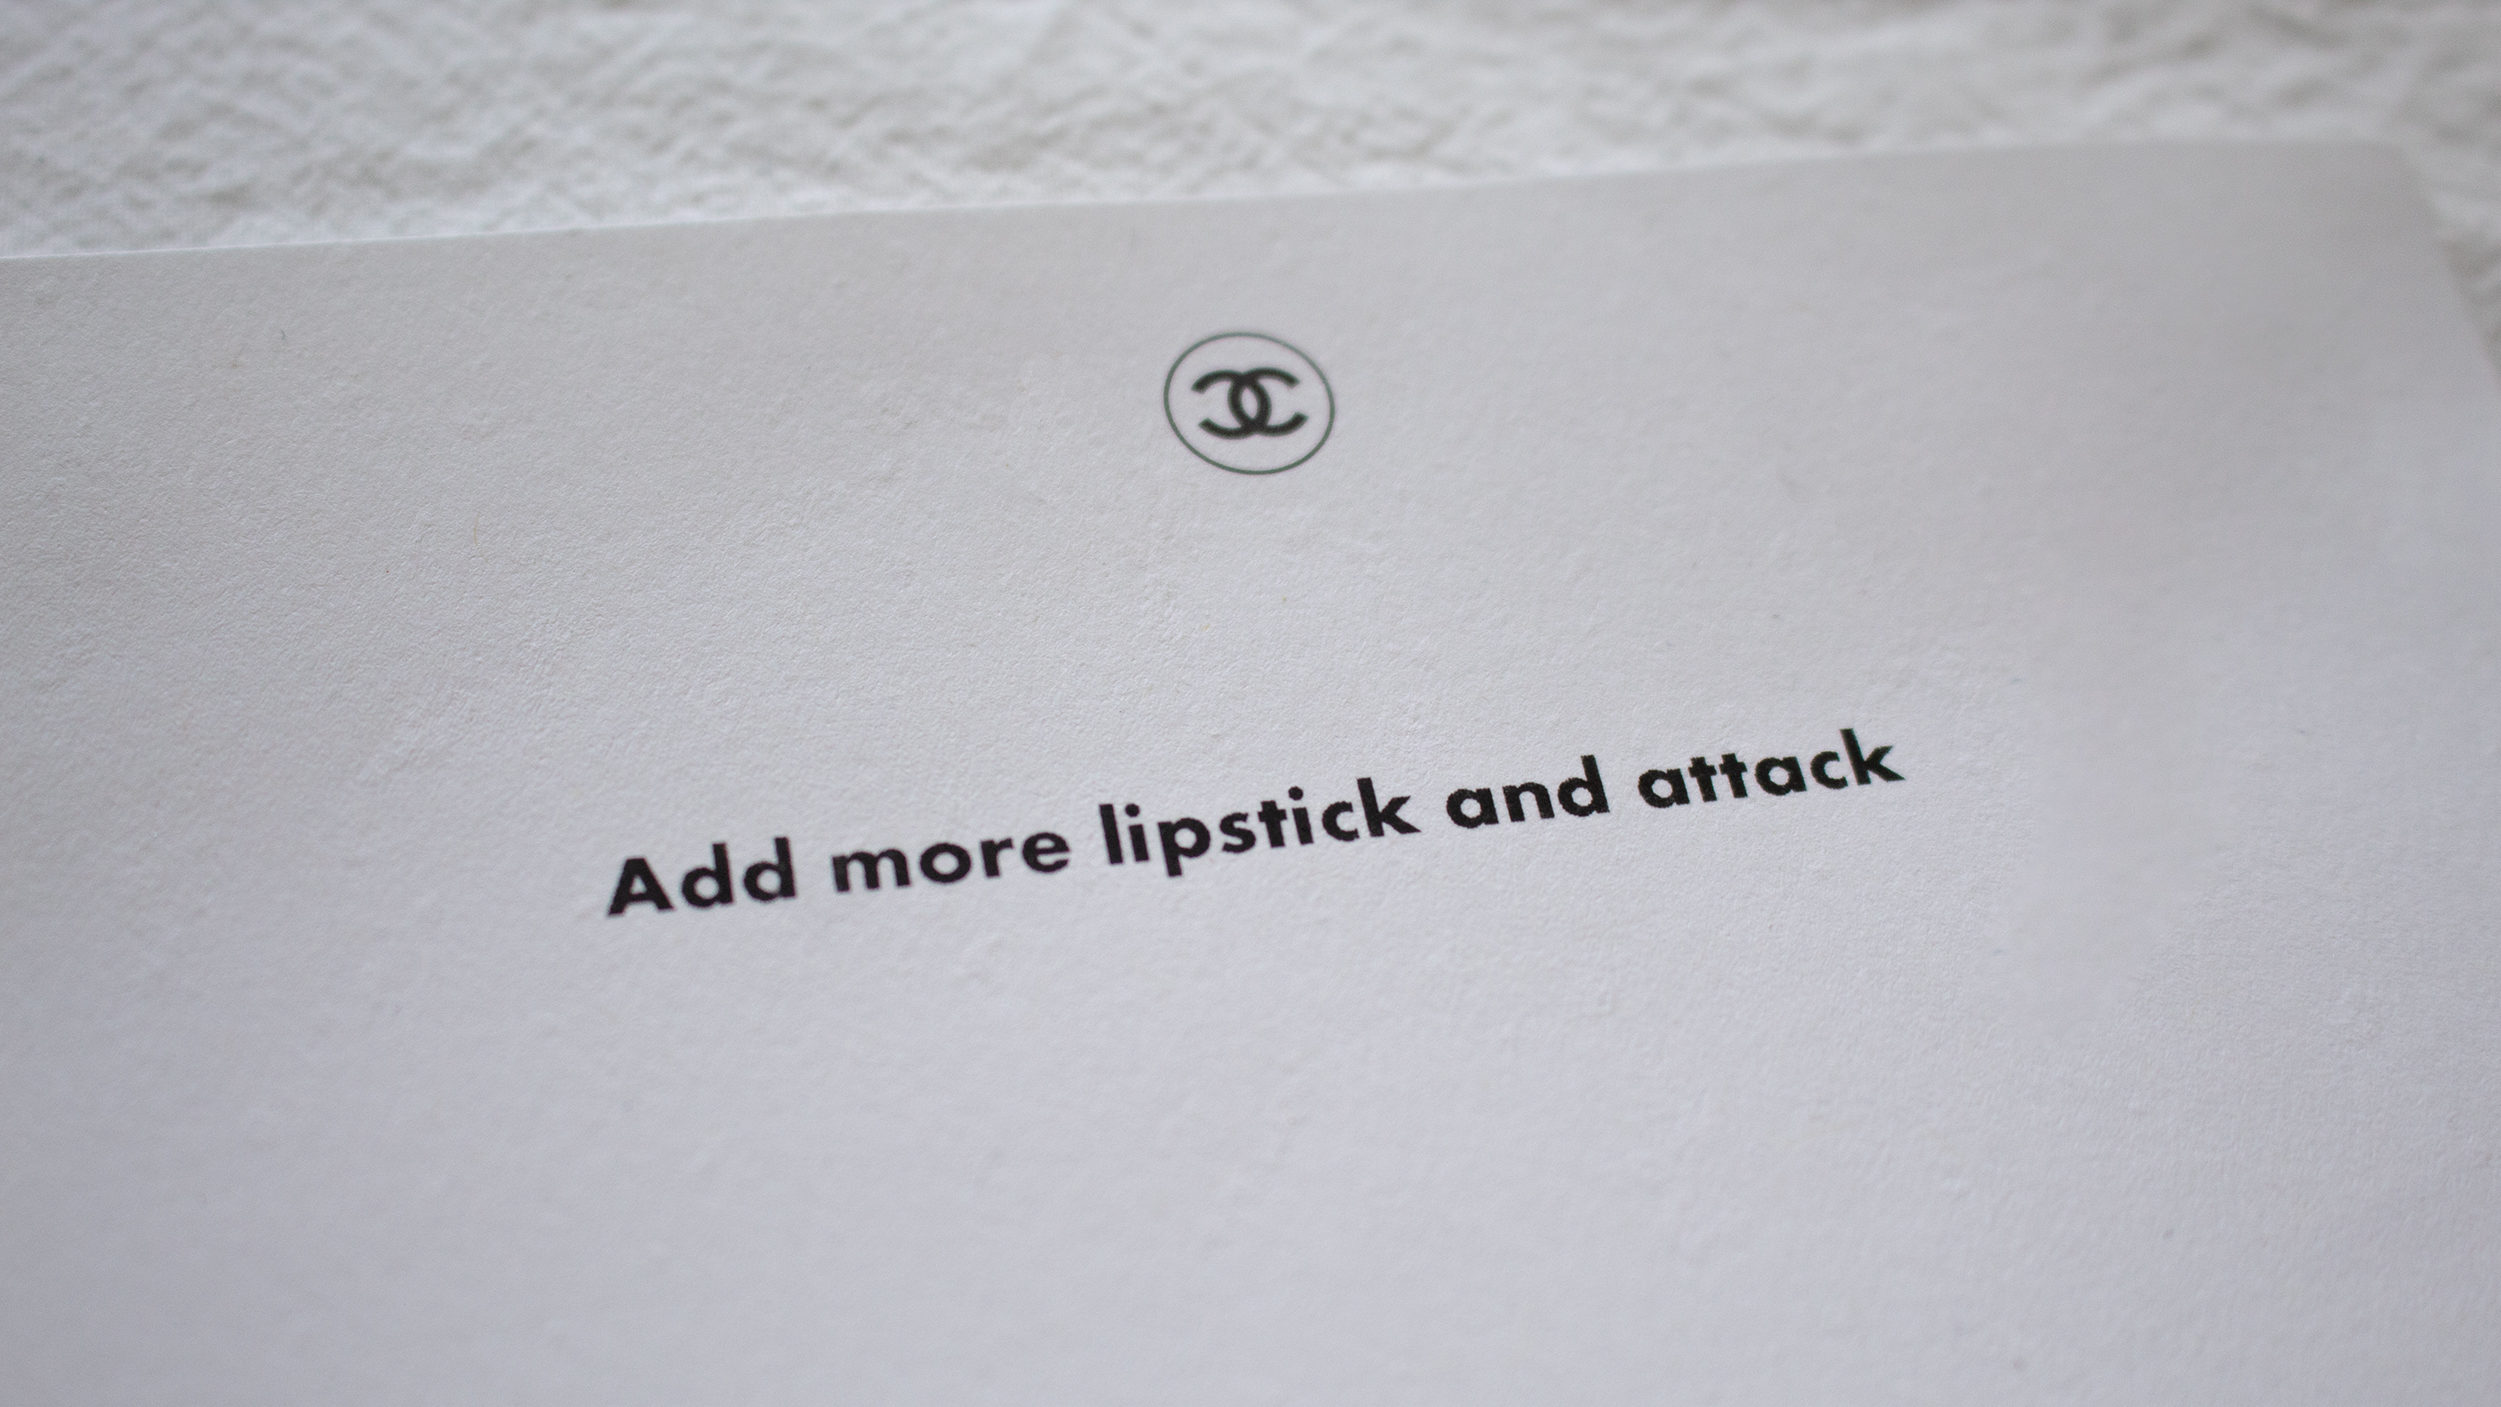 A white card that says Add more lipstick and attack against a white bed comforter